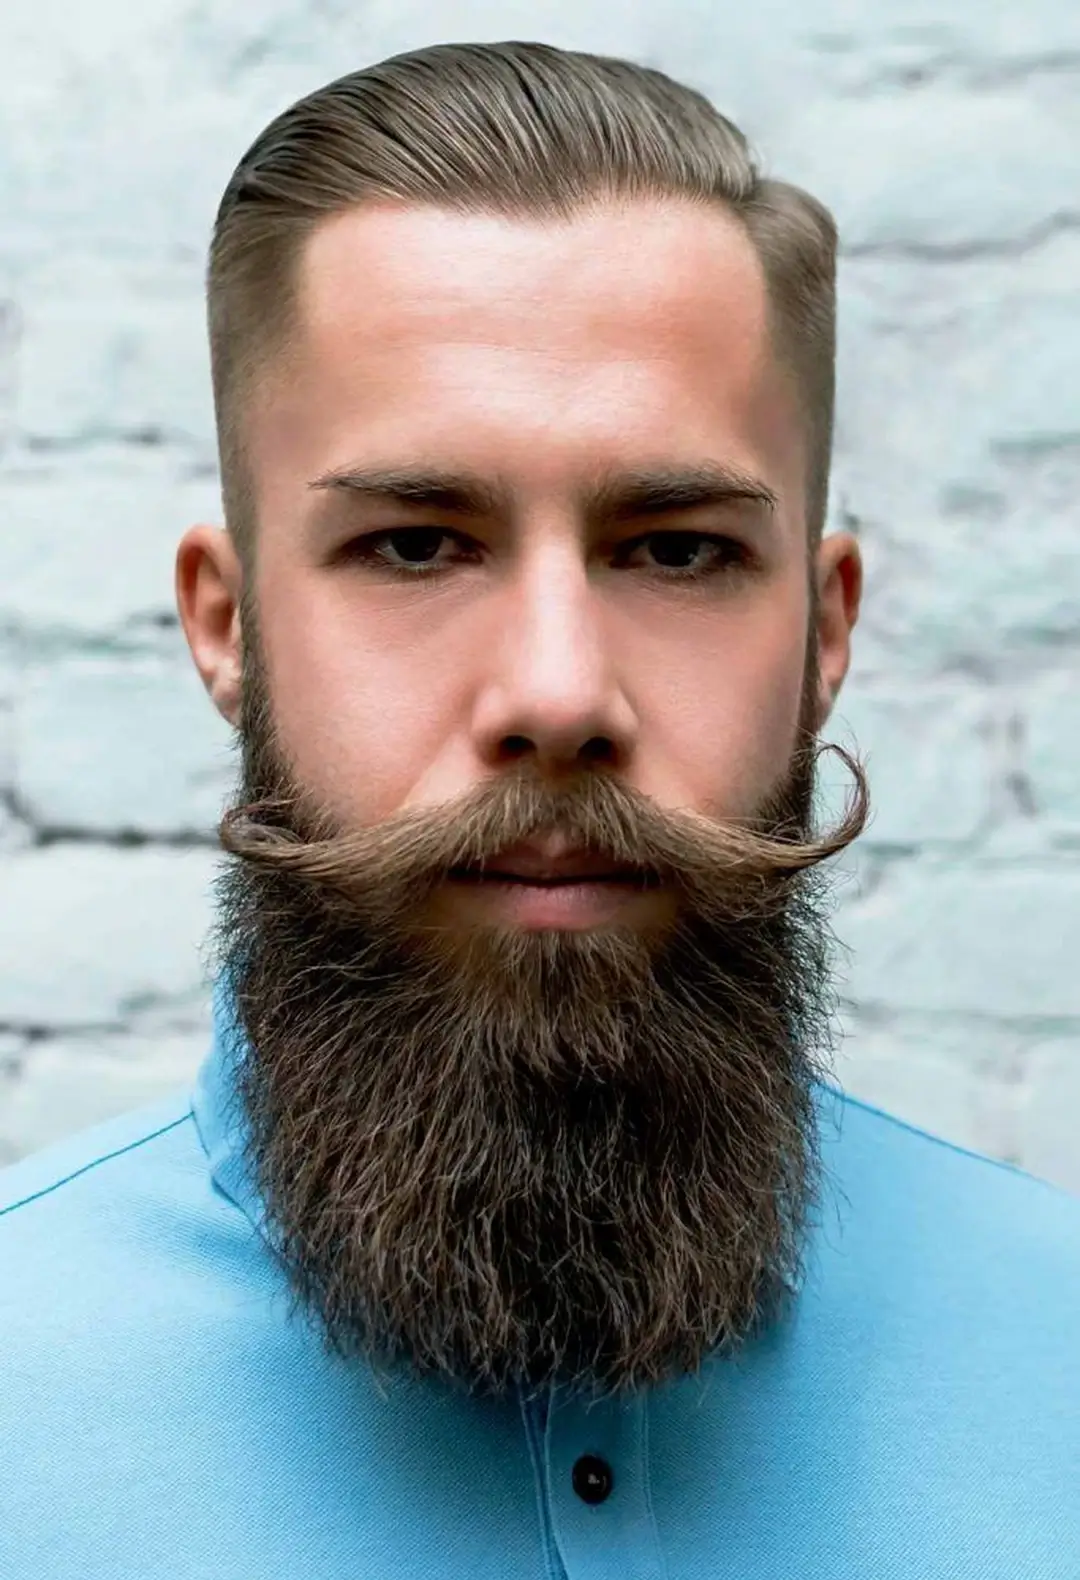 Men's Modern Trimmed Viking Beard from Fifth Ave Barber Shop in Midtown NYC